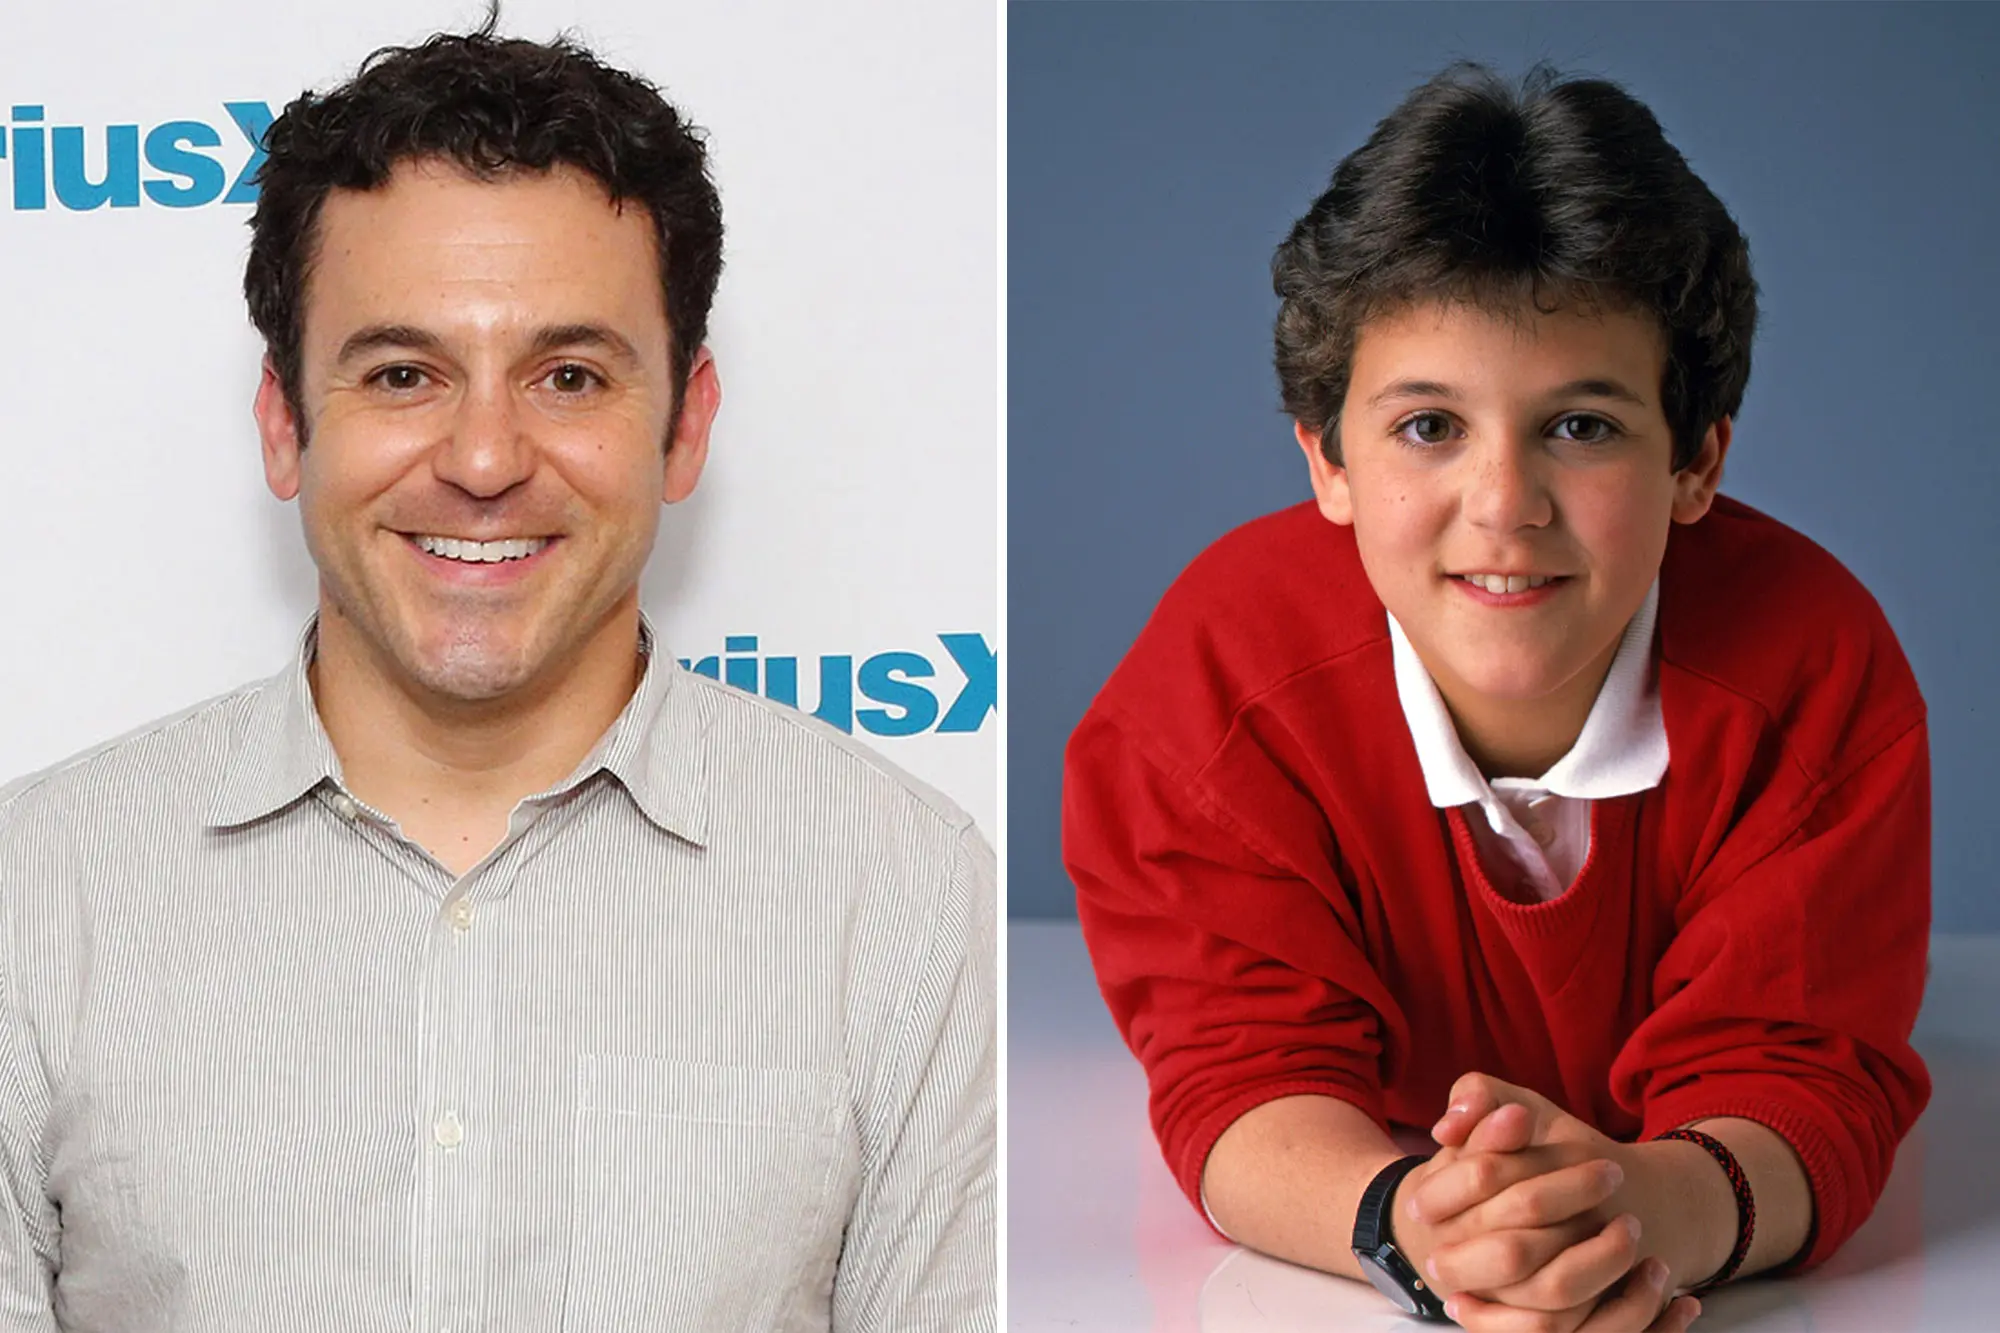 A young Fred Savage, from when he used to play Kevin Arnold in the 1980s sitcom "The Wonder Years."